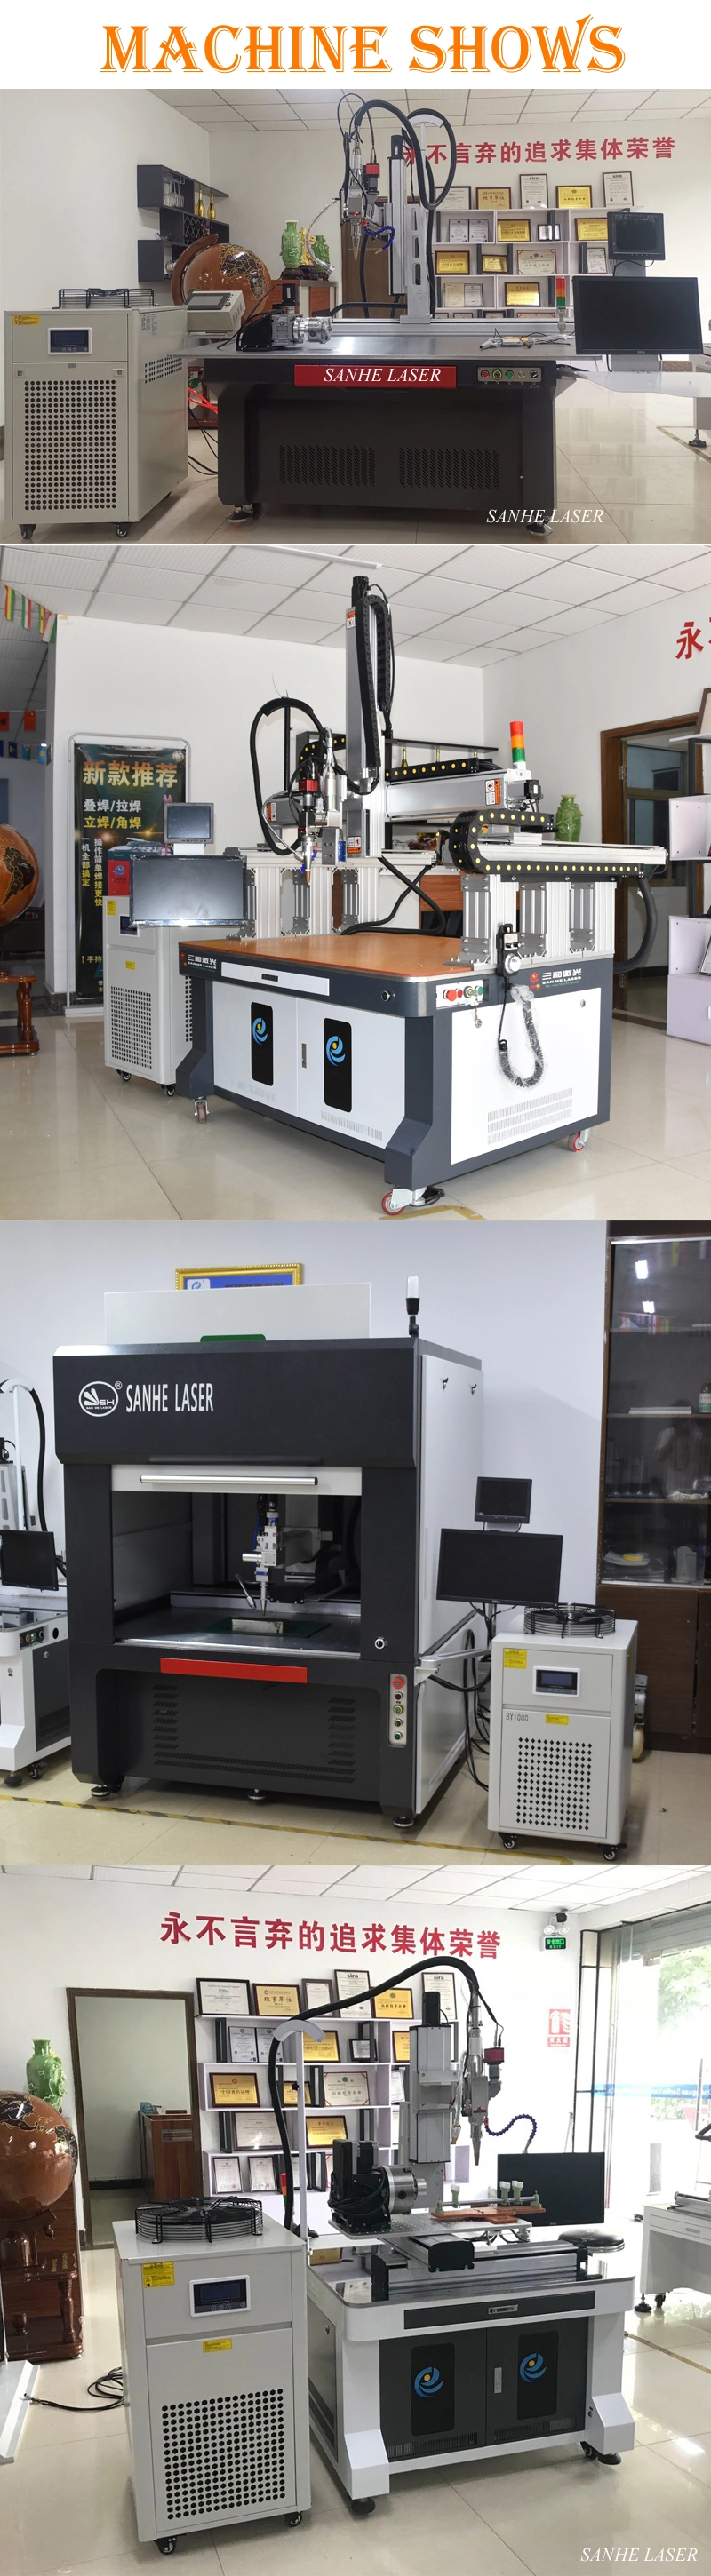 Factory Price 6 Axis Fiber Laser Welding Machine with Feeding Wires for Aluminium Brass Copper